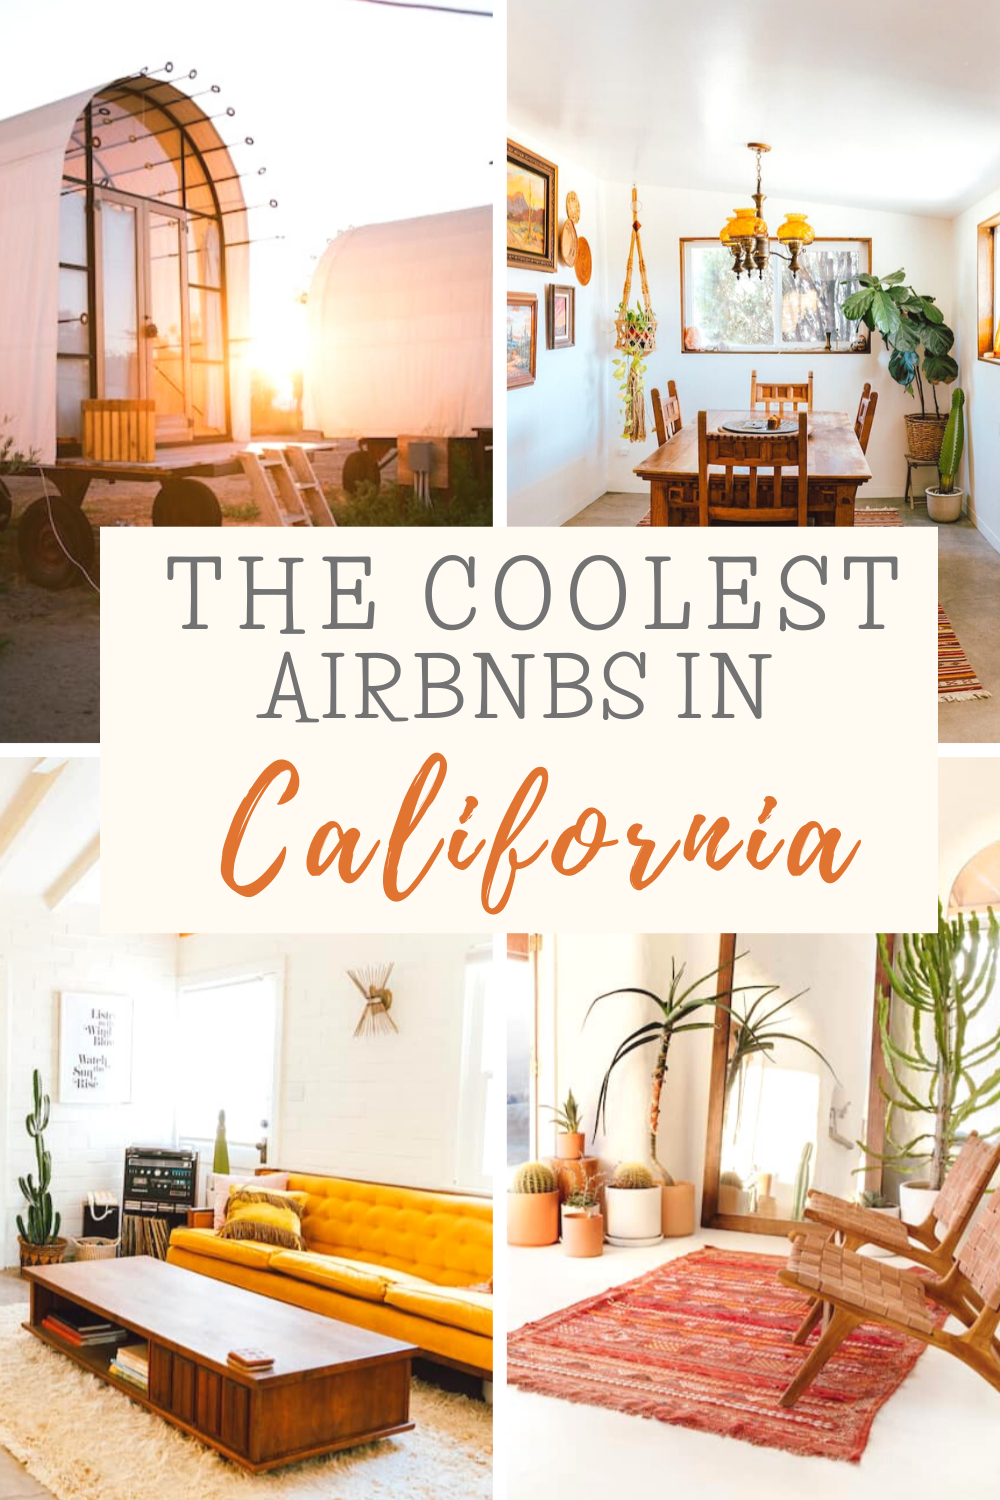 THE COOLEST Airbnb Stays in California